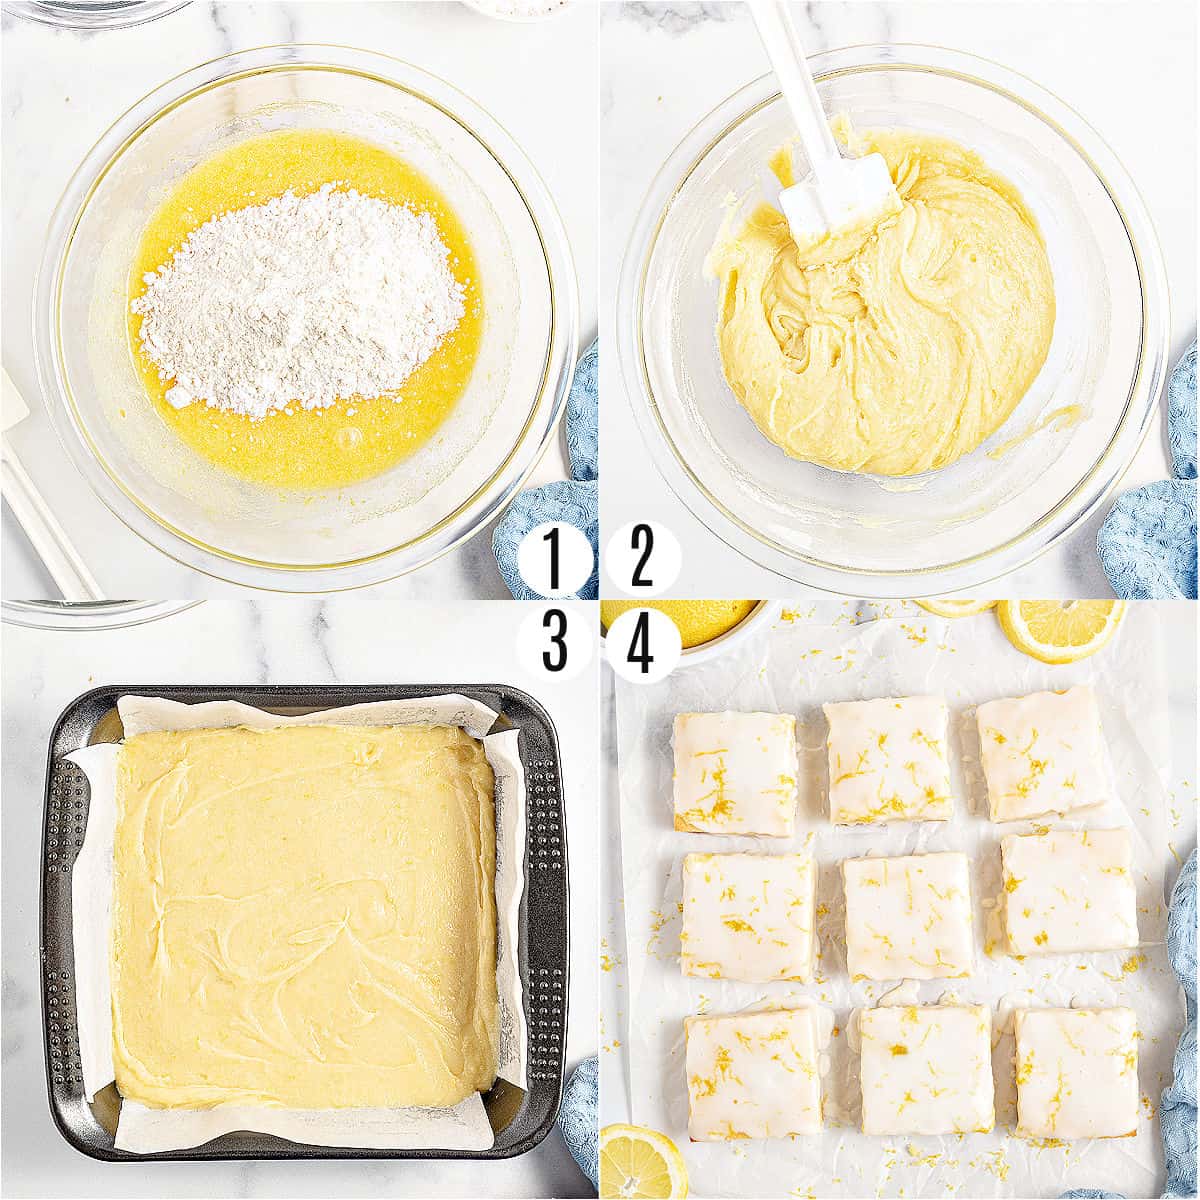 Step by step photos showing how to make lemon brownies.